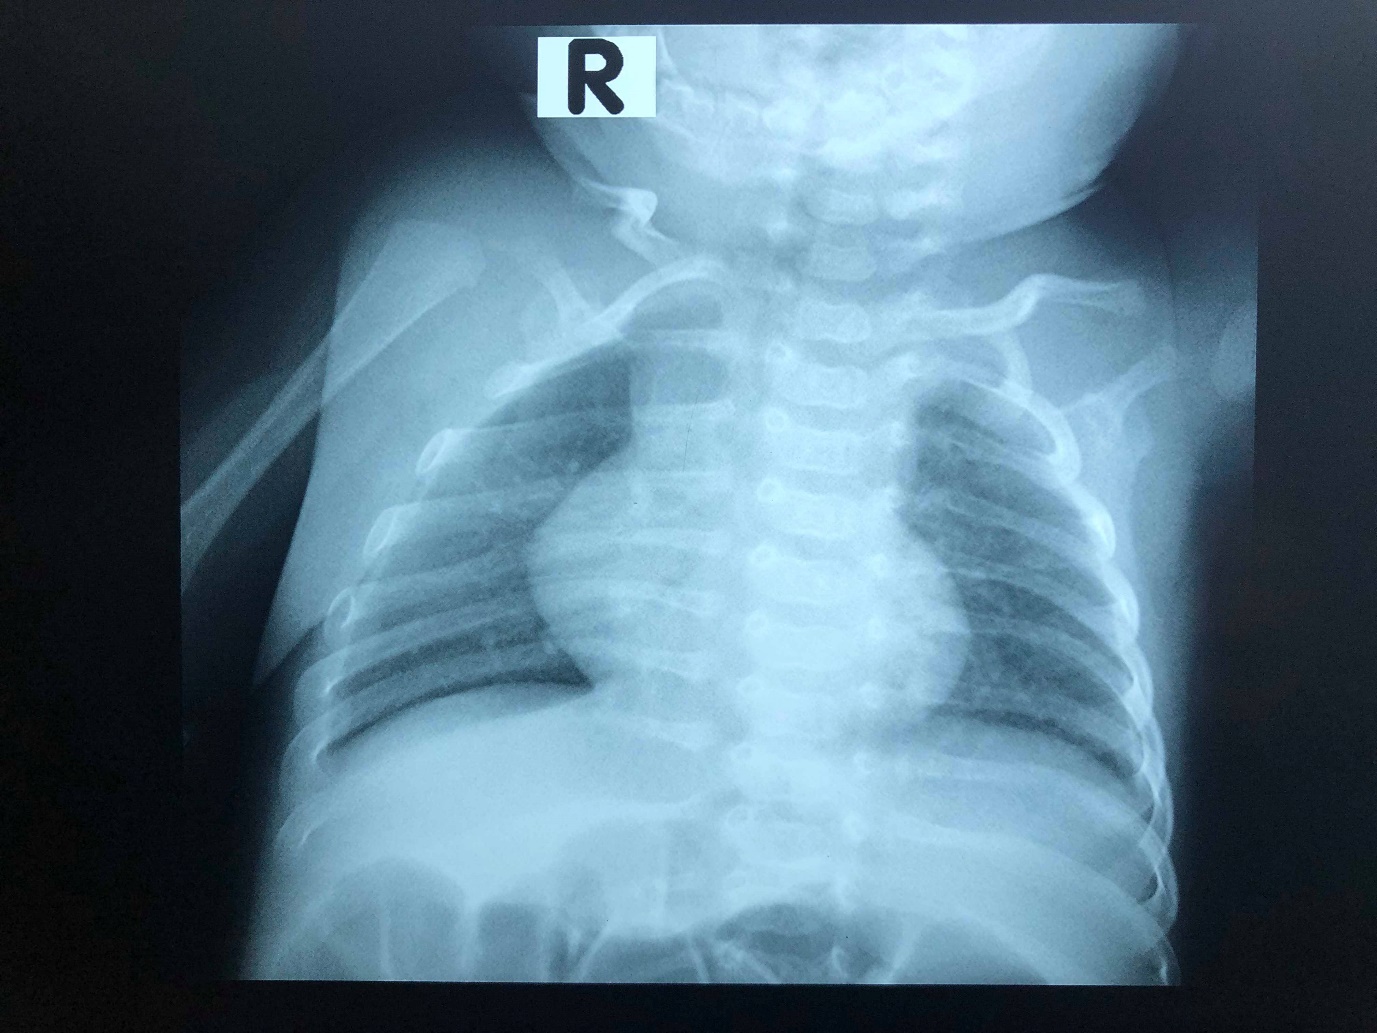 A picture containing X-ray film, necktie

Description automatically generated